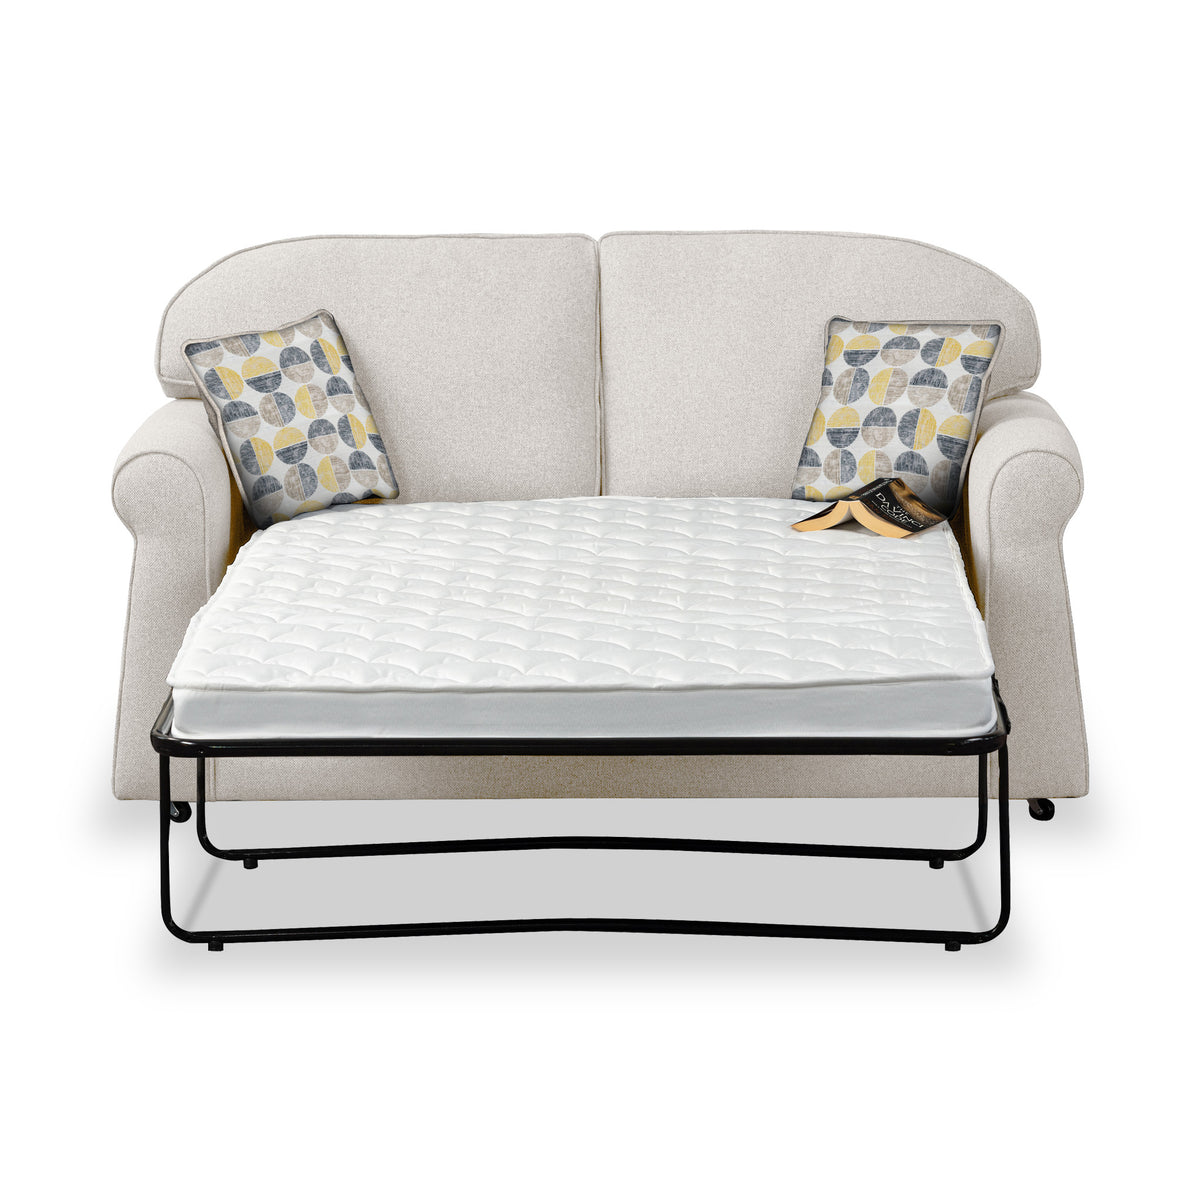 Giselle Oatmeal Soft Weave 2 Seater Sofabed with Beige Scatter Cushions from Roseland Furniture